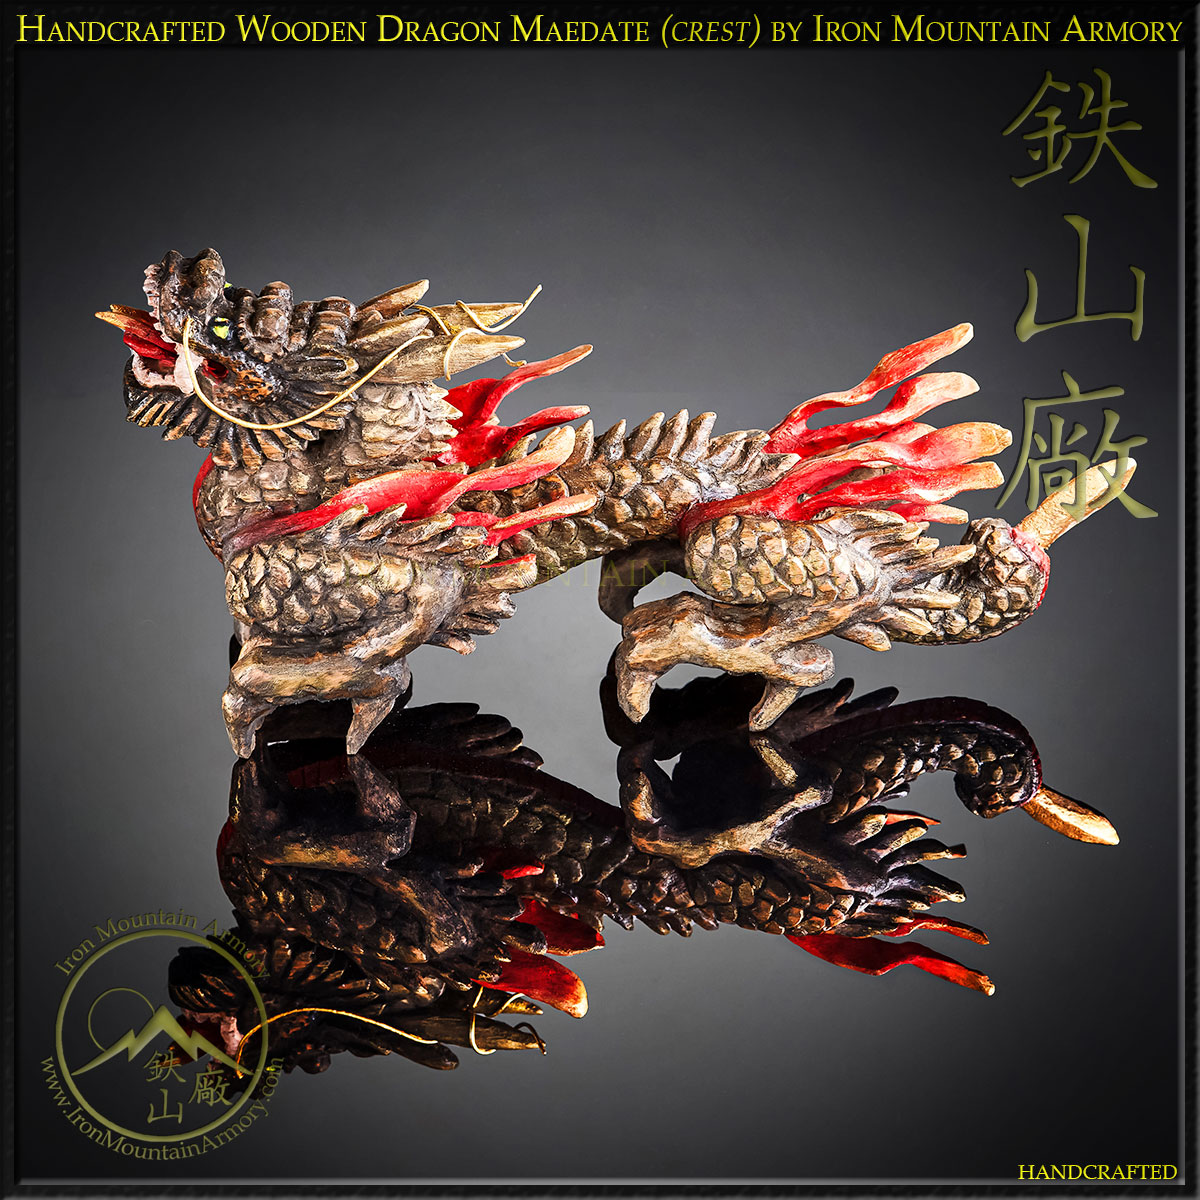 https://shop.samurai-armor.com/wp-content/uploads/2021/09/Handcrafted-Wooden-Dragon-Maedate-crest-01-by-Iron-Mountain-Armory.jpg